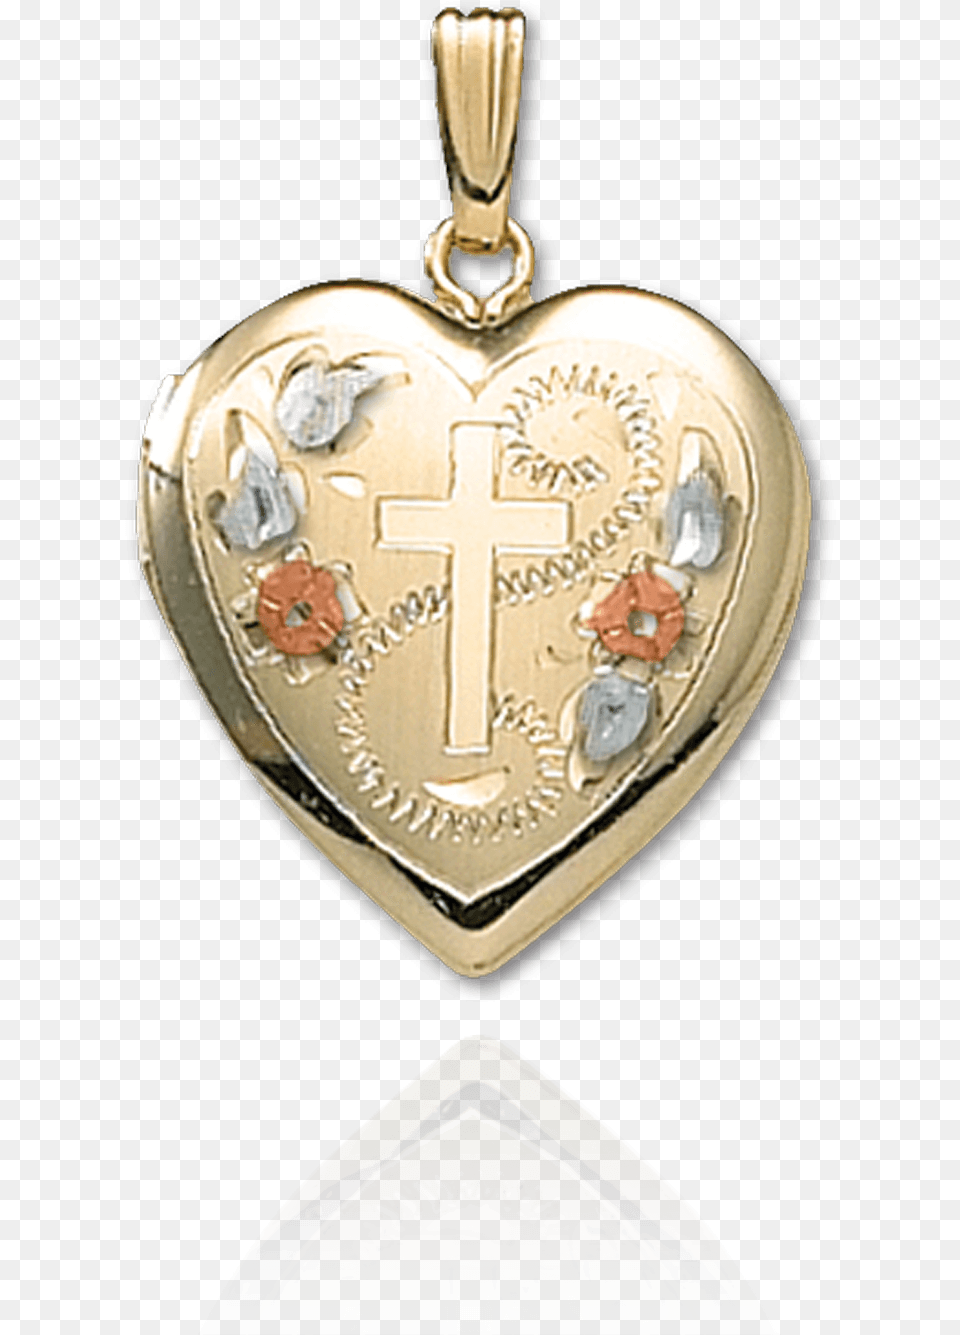 Heart Locket Engraved With Cross And Flower Design Locket, Accessories, Pendant, Jewelry Free Png